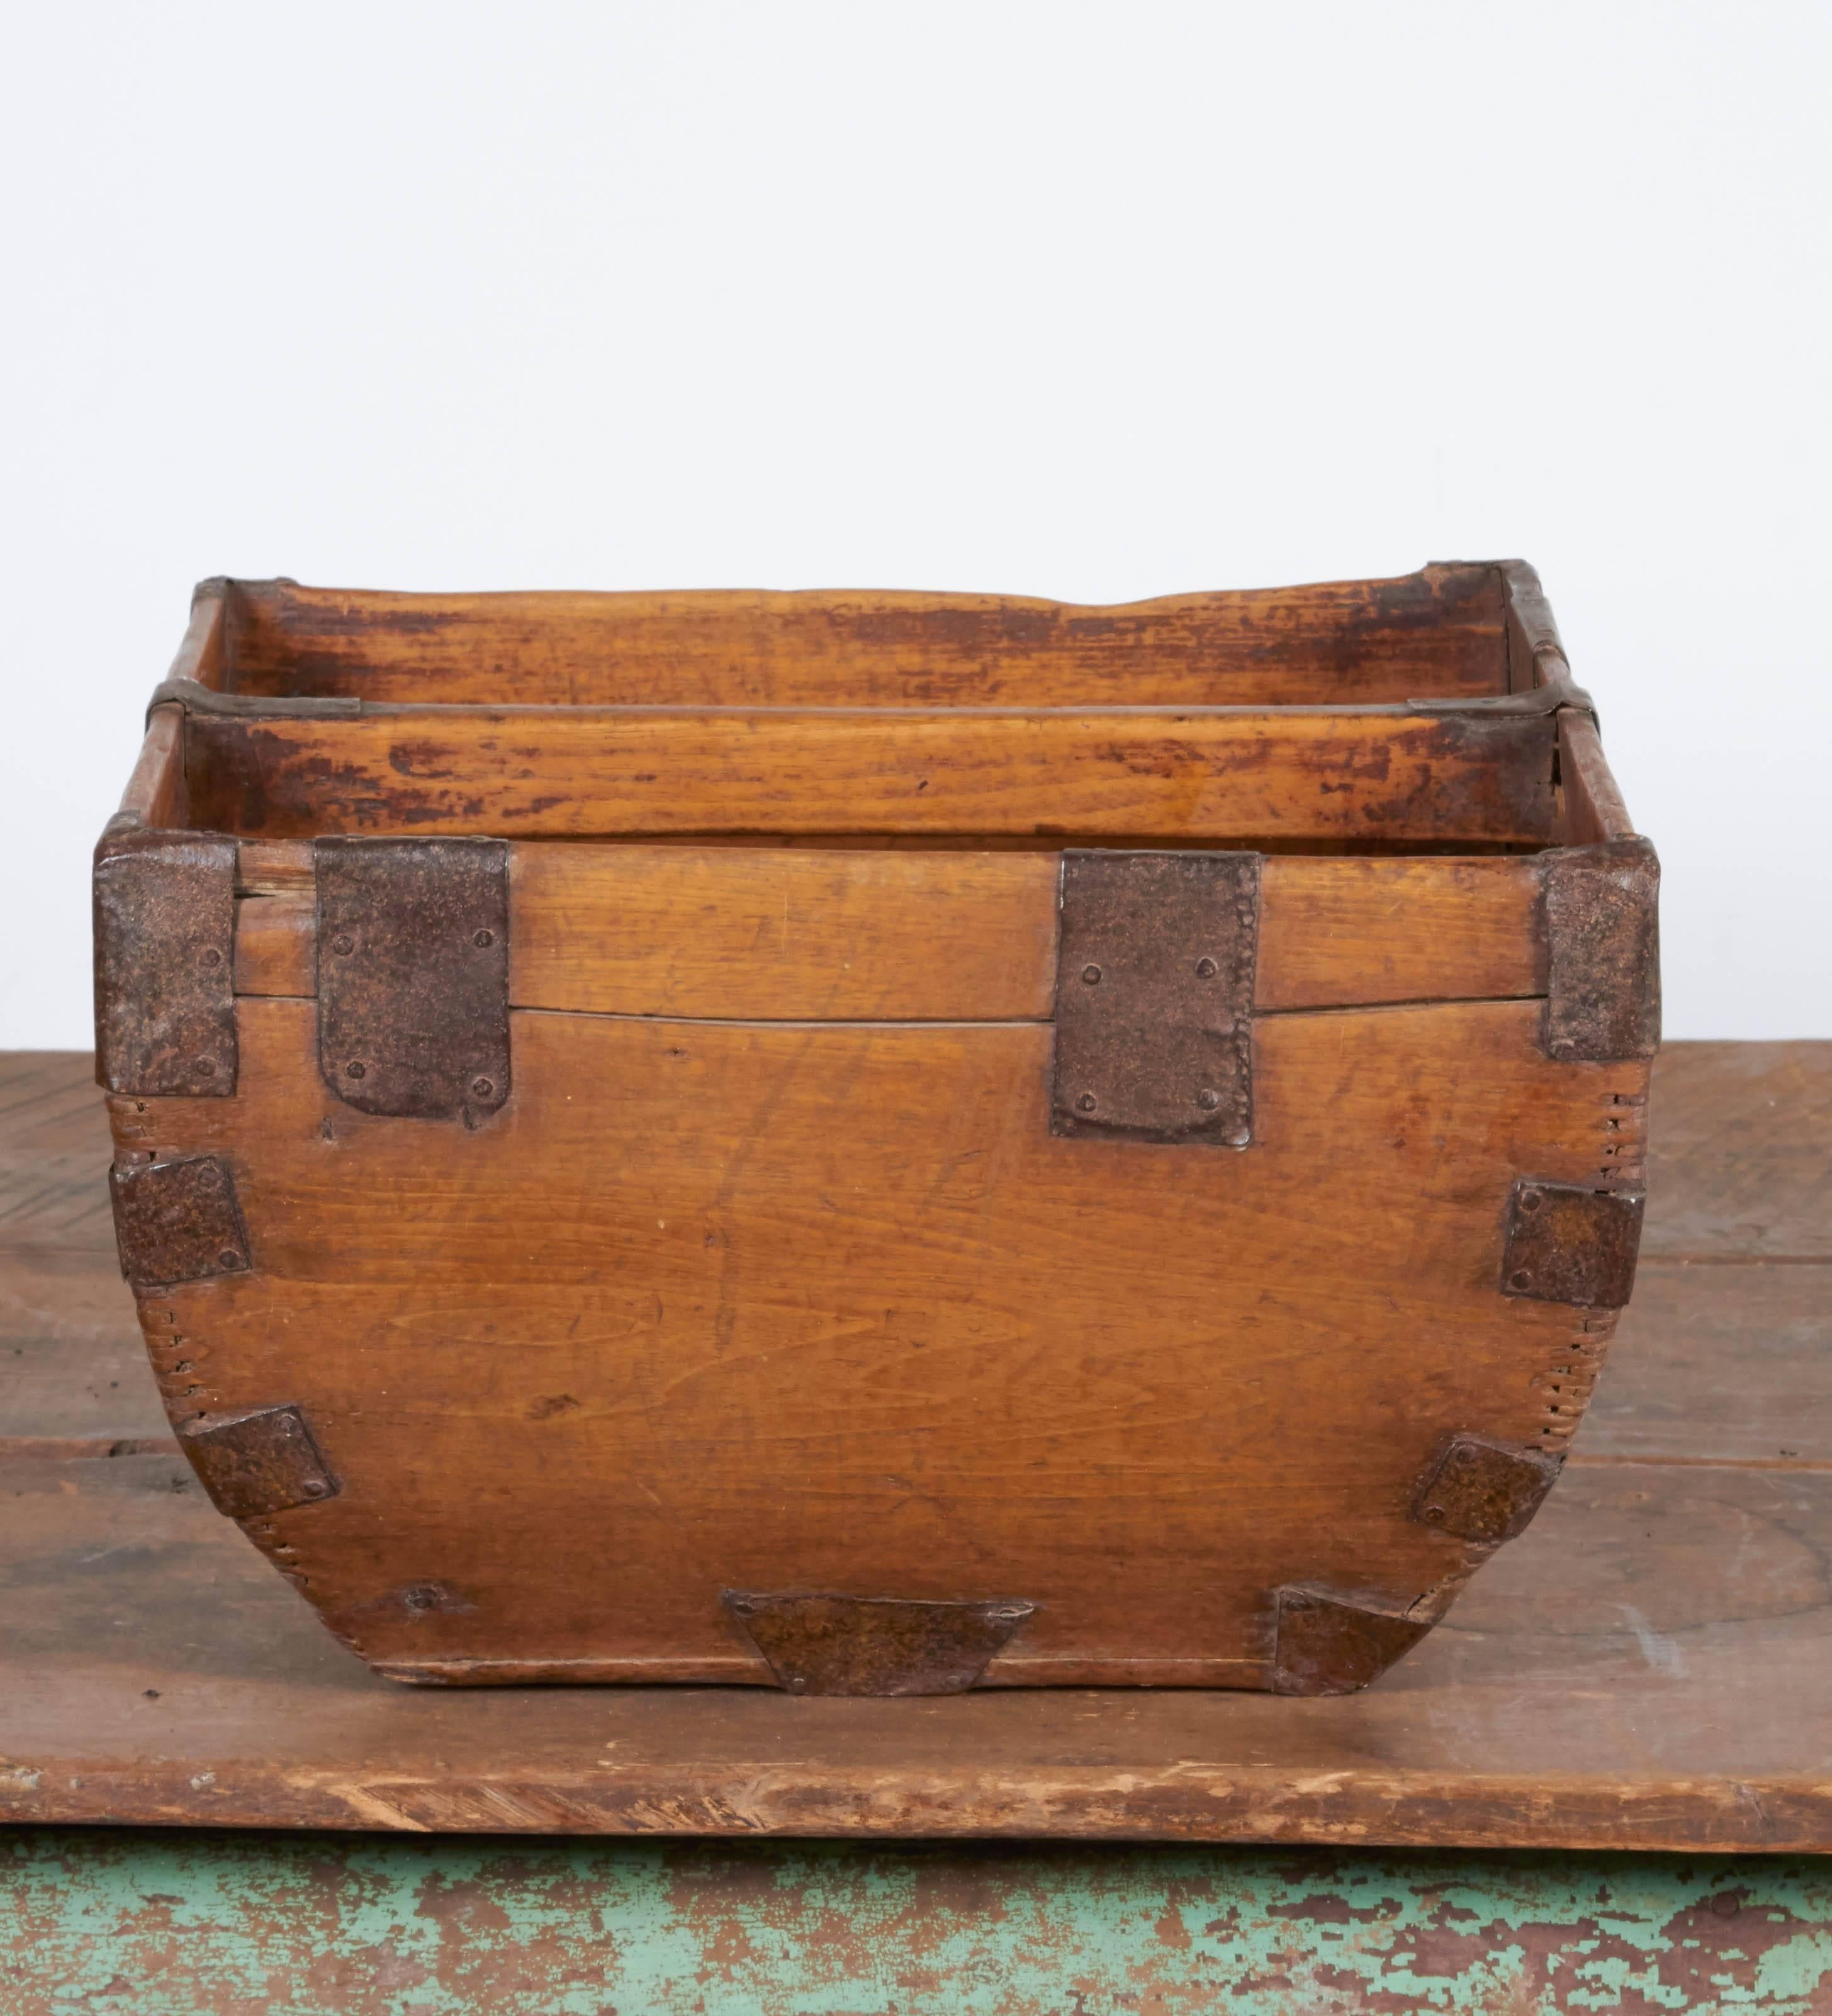 A rustic antique Chinese rice measure basket with beautiful patina and original metal hardware. Ideal for mail, magazines, or in the entry way for flip flops or dog leashes and toys. From Shandong Province.
B446.